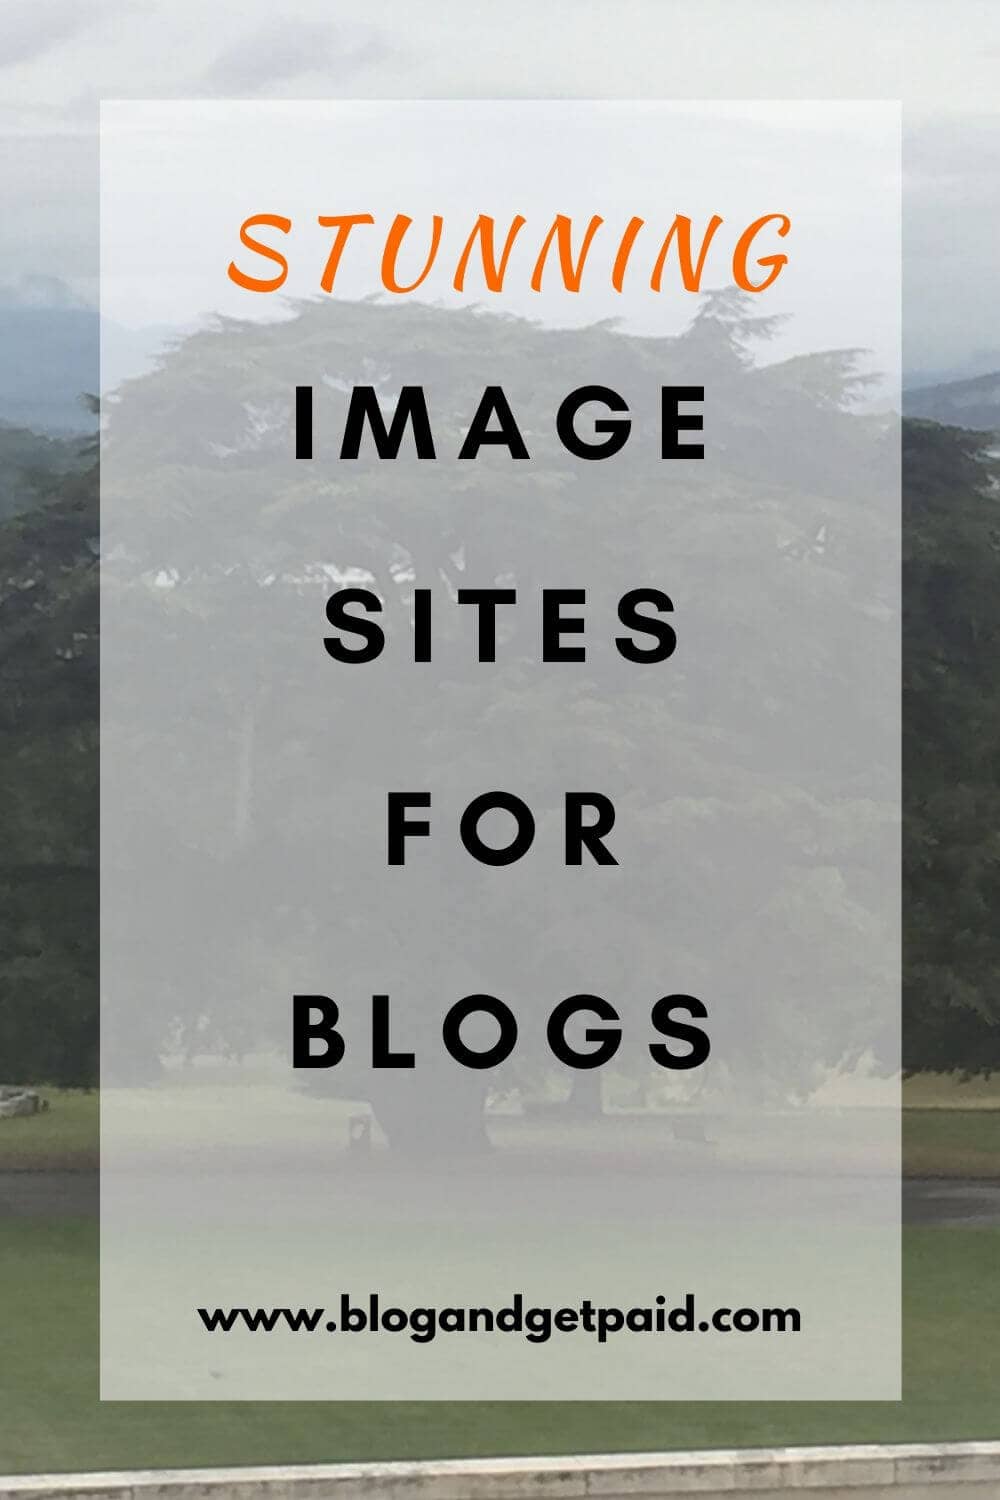 Stunning Image Sites That Make Blogs Stand Out